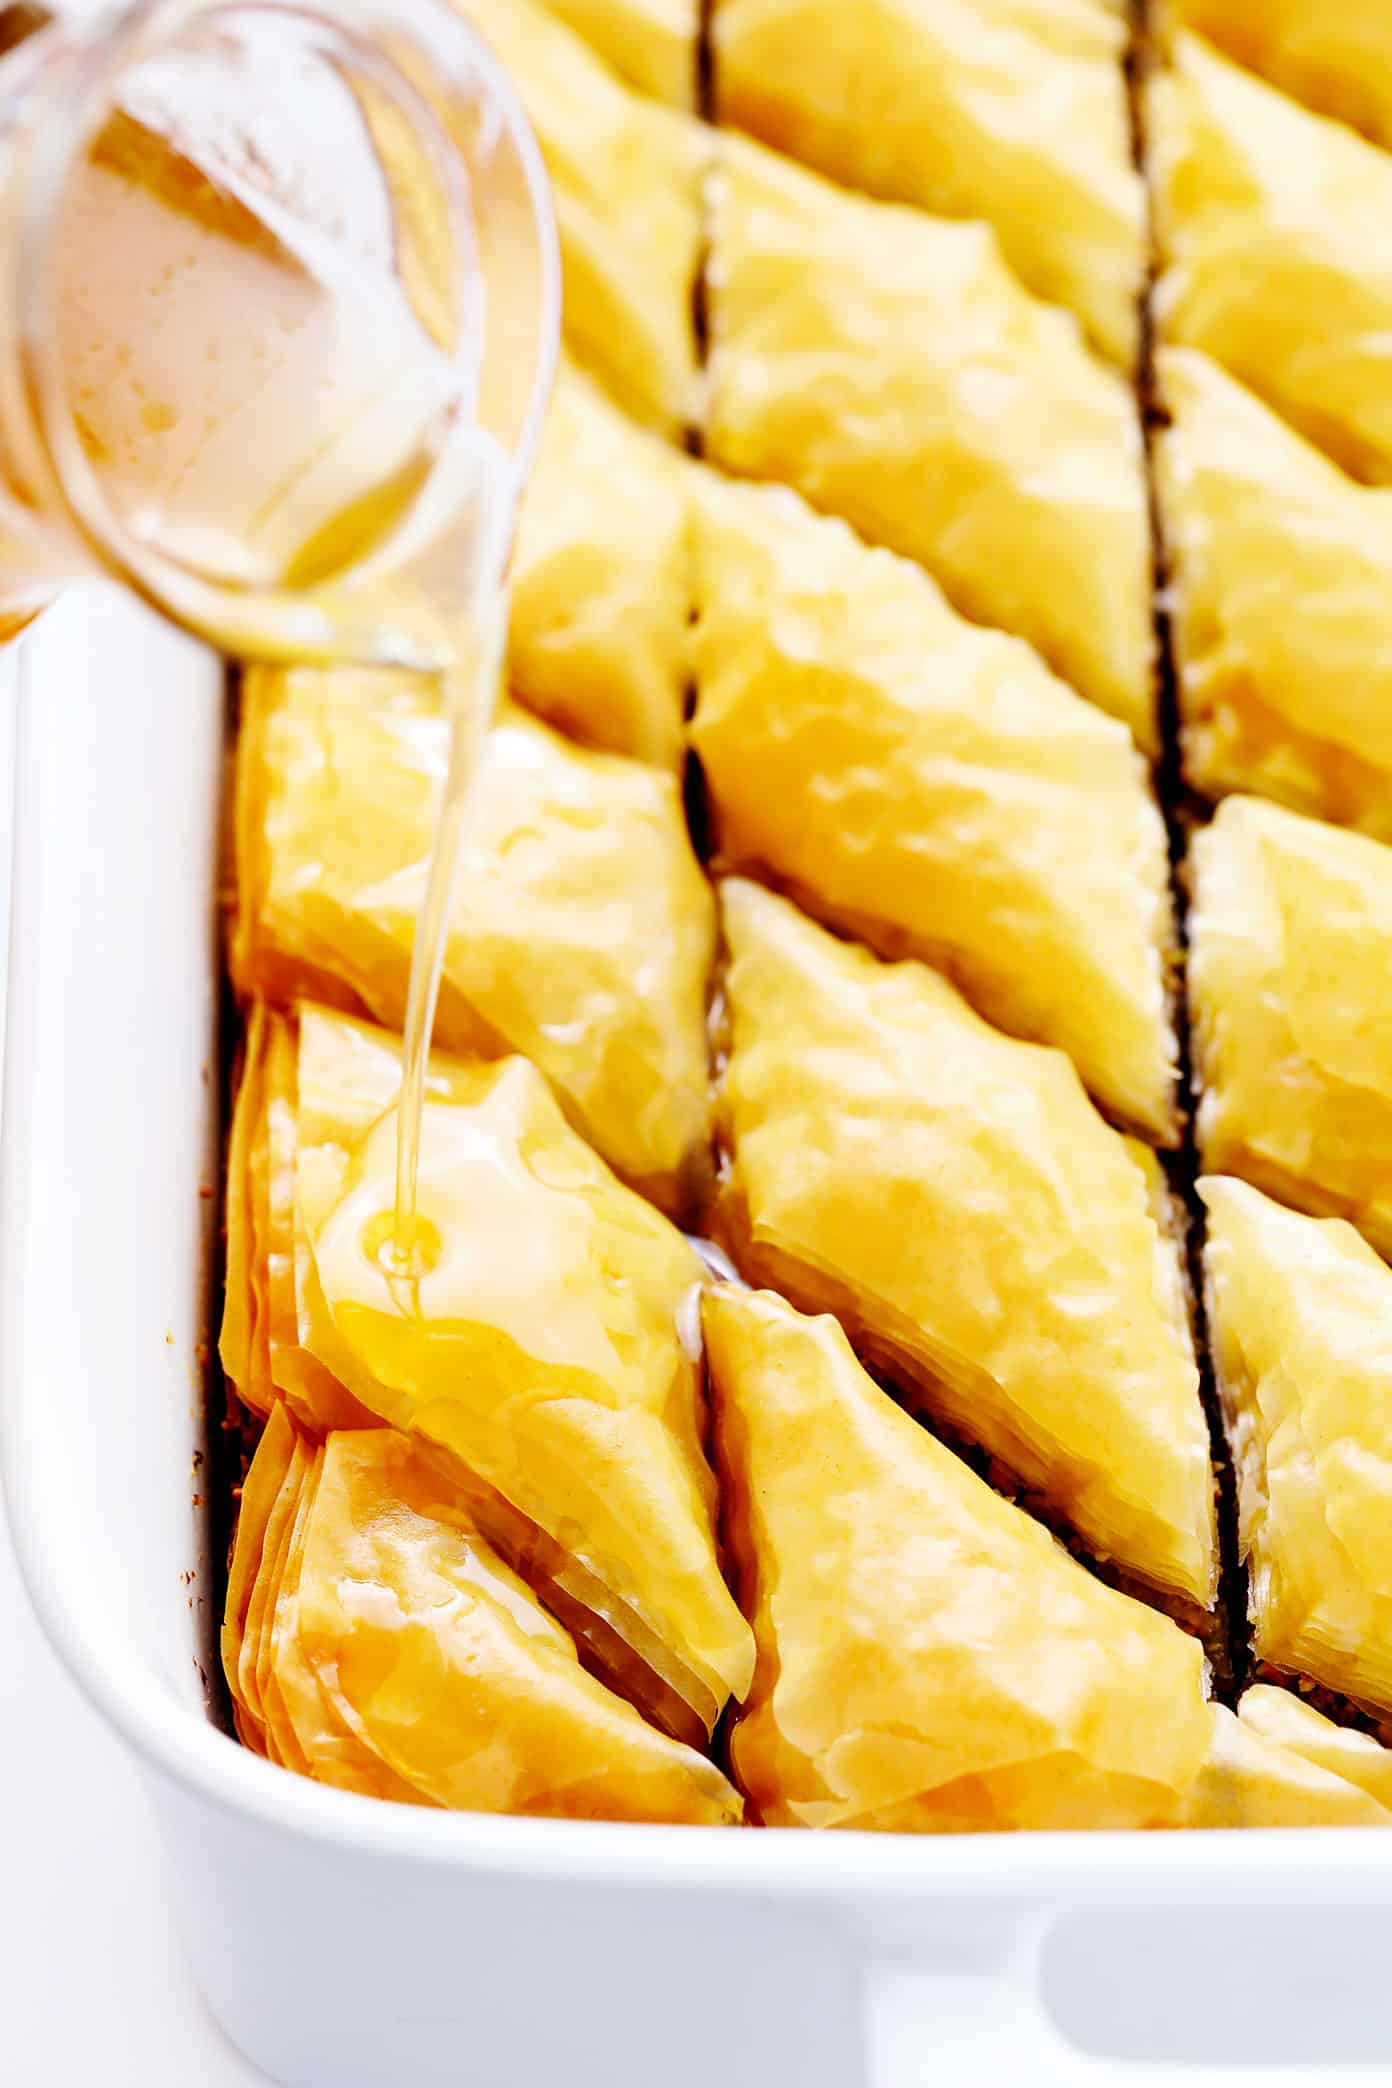 Drizzling cold syrup on hot baklava